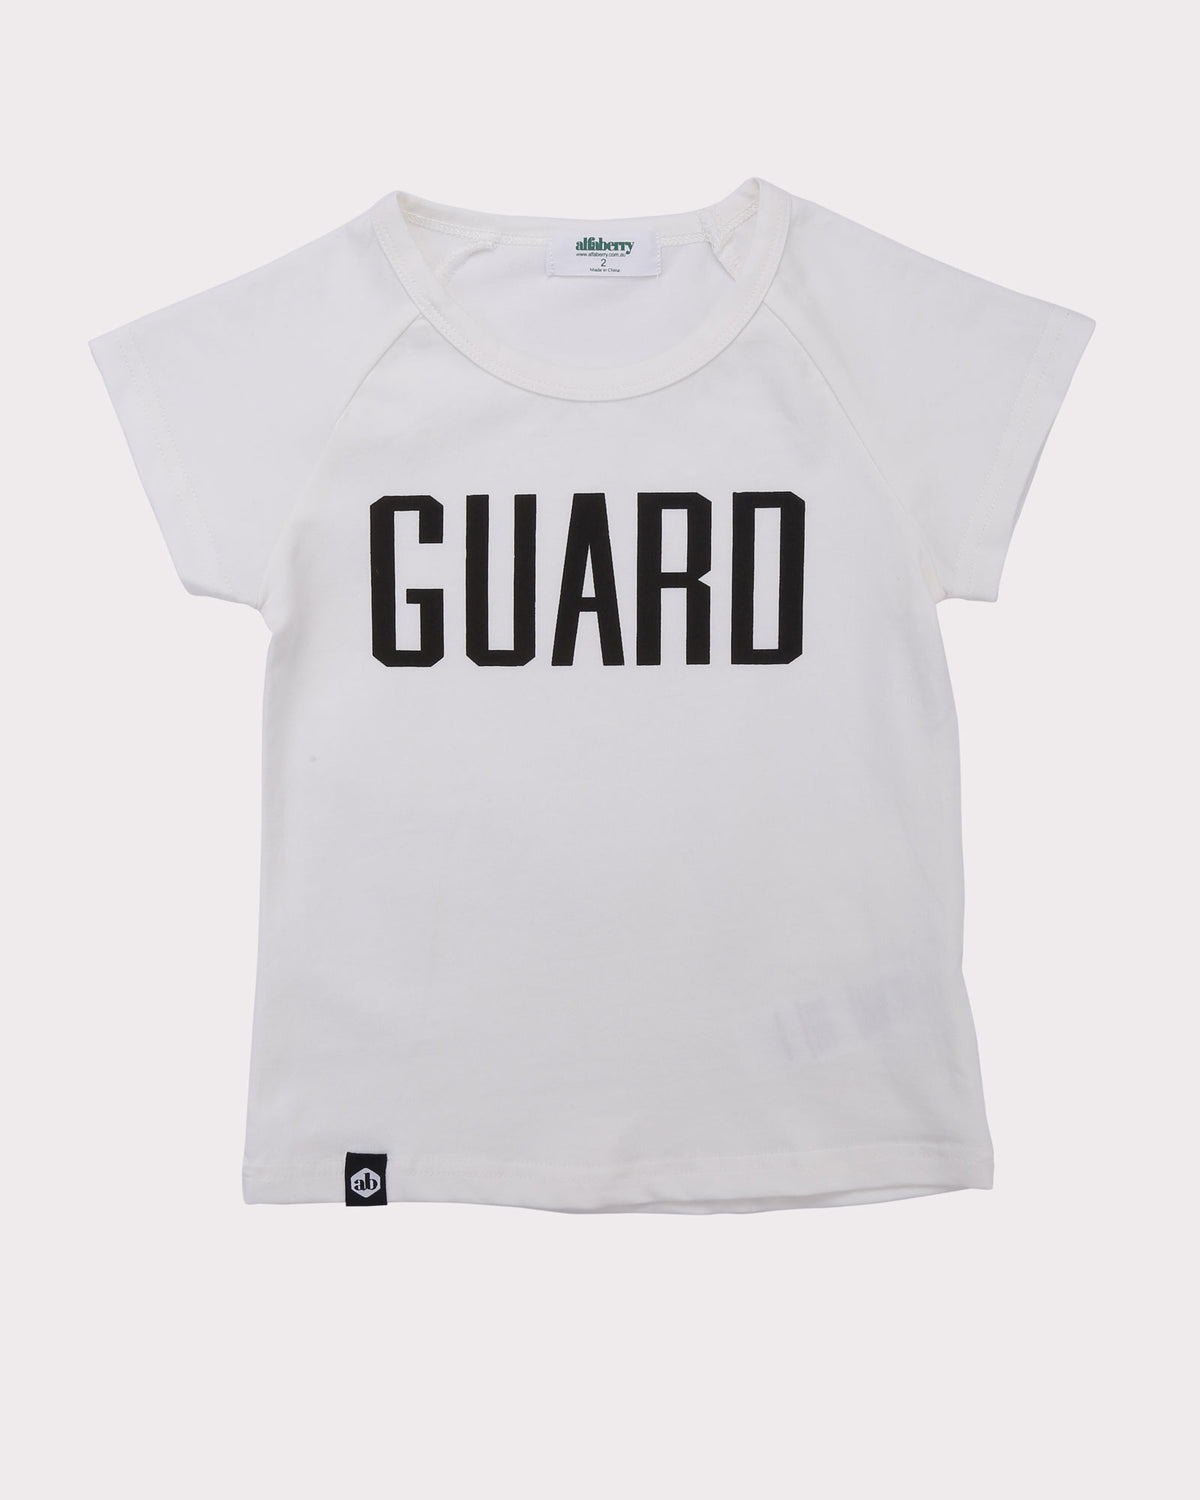 Guard Tee in Ivory front